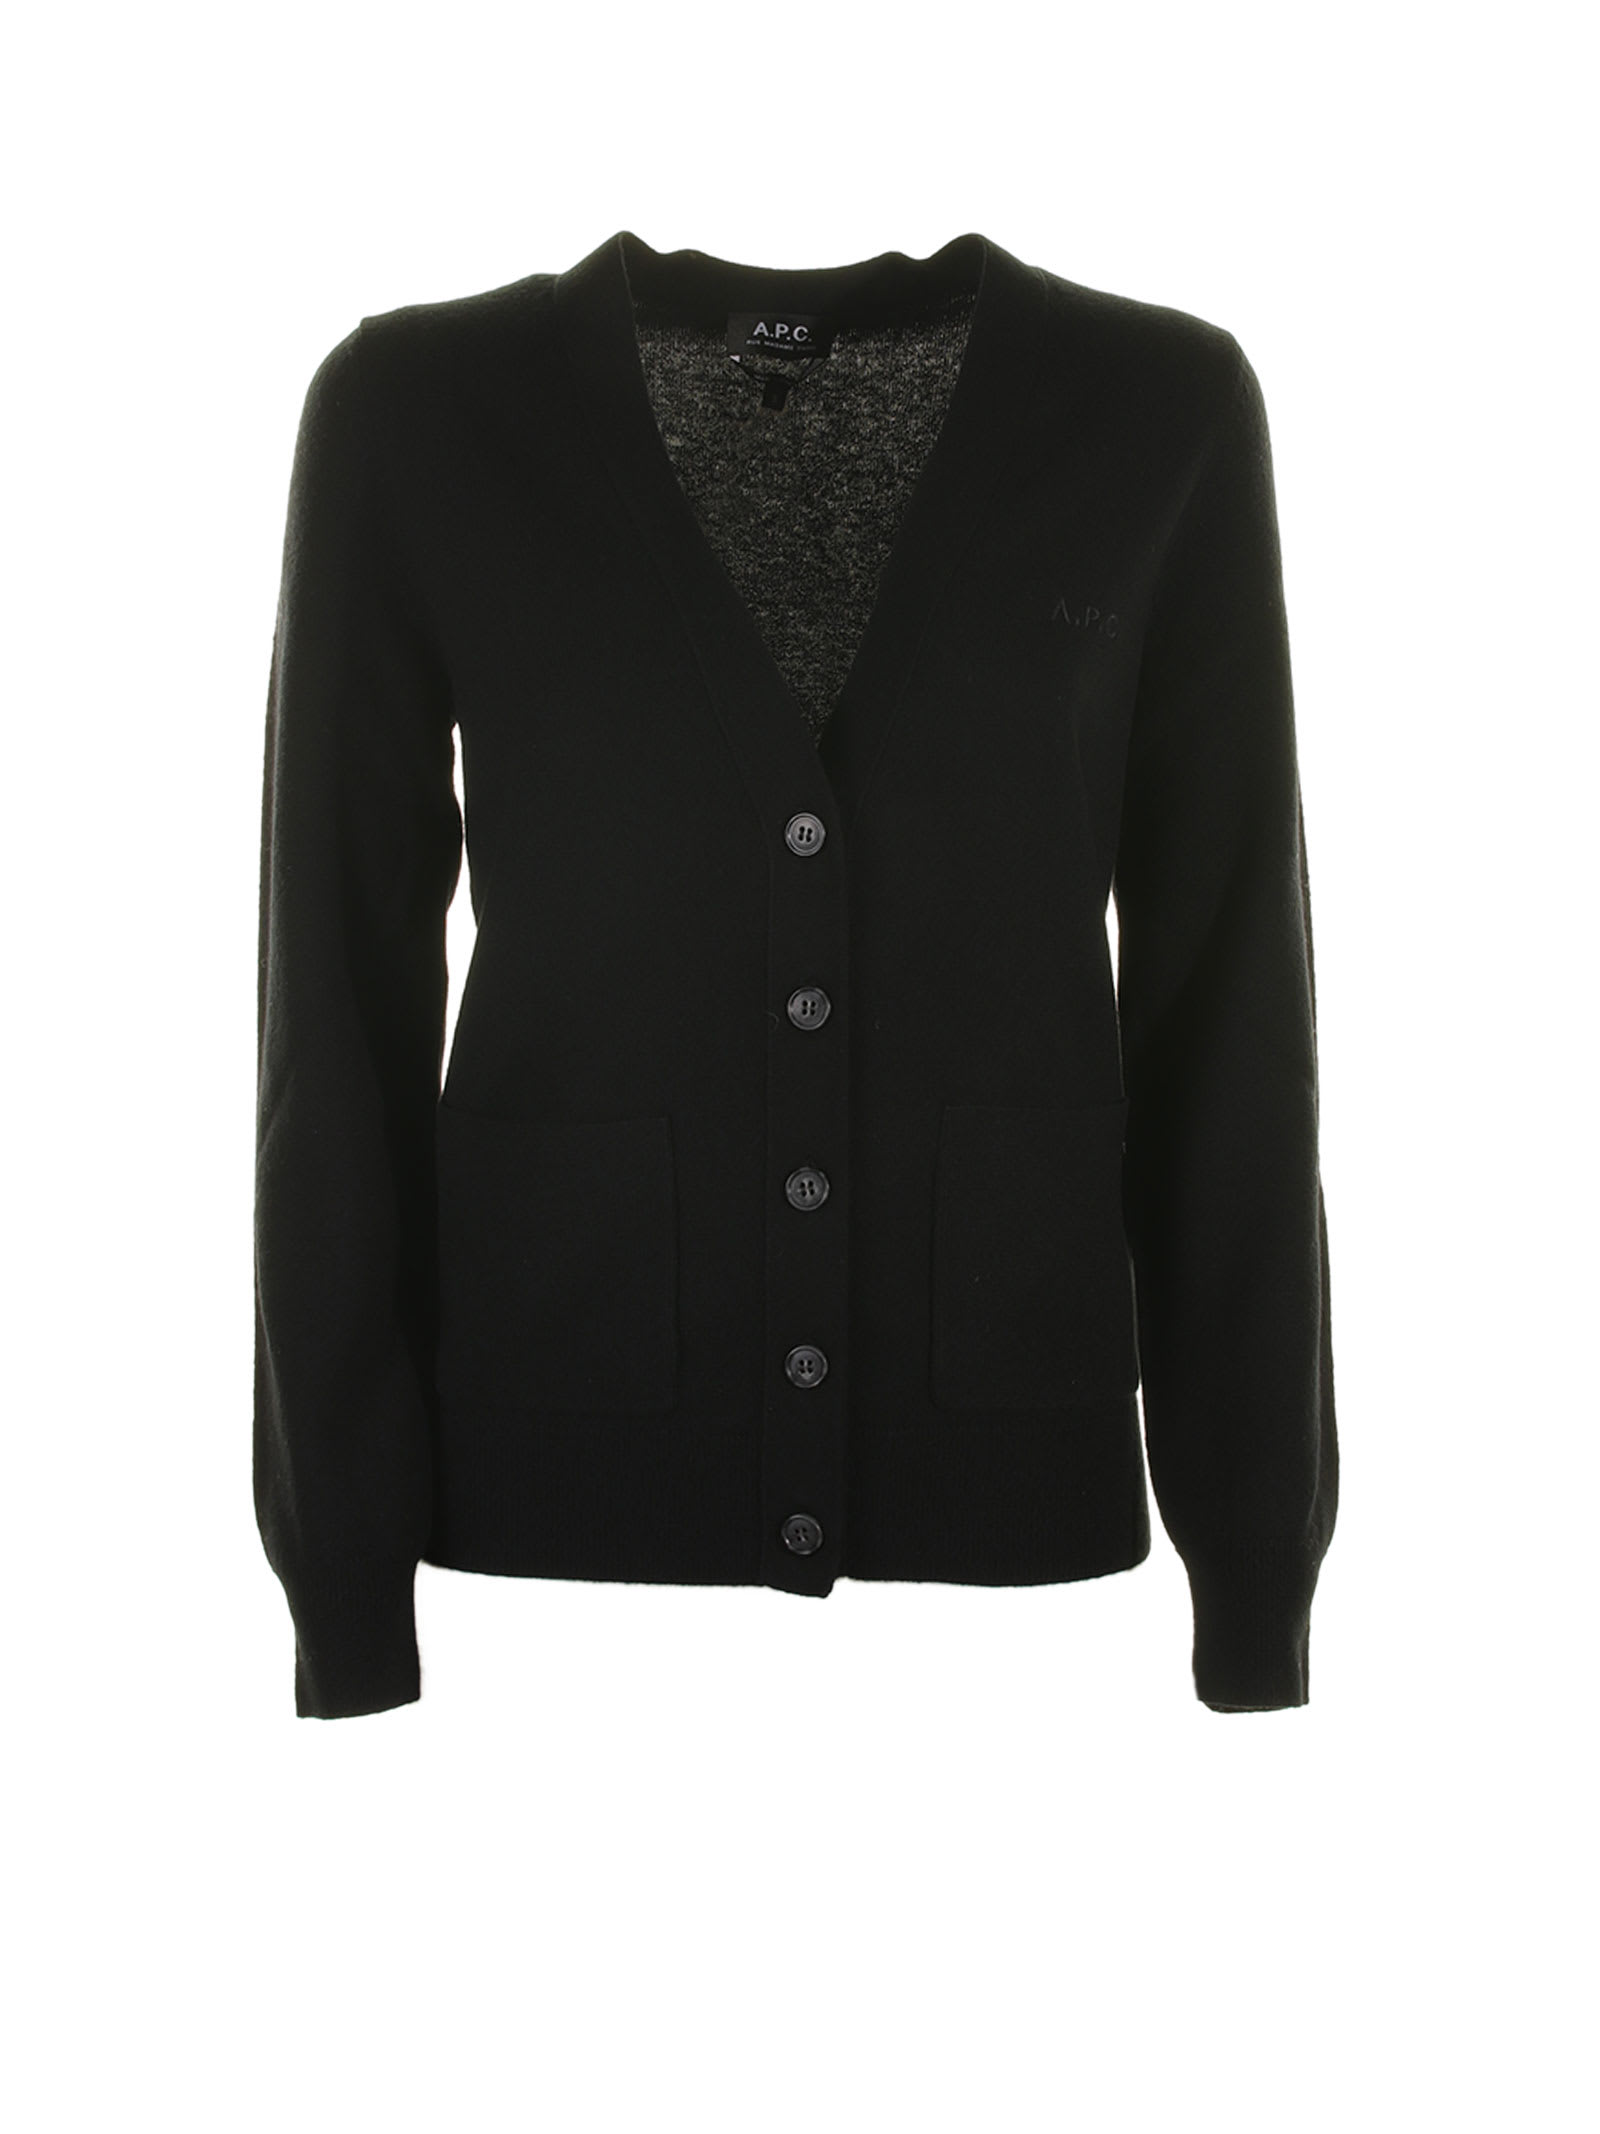 Apc Black Cardigan With Buttons